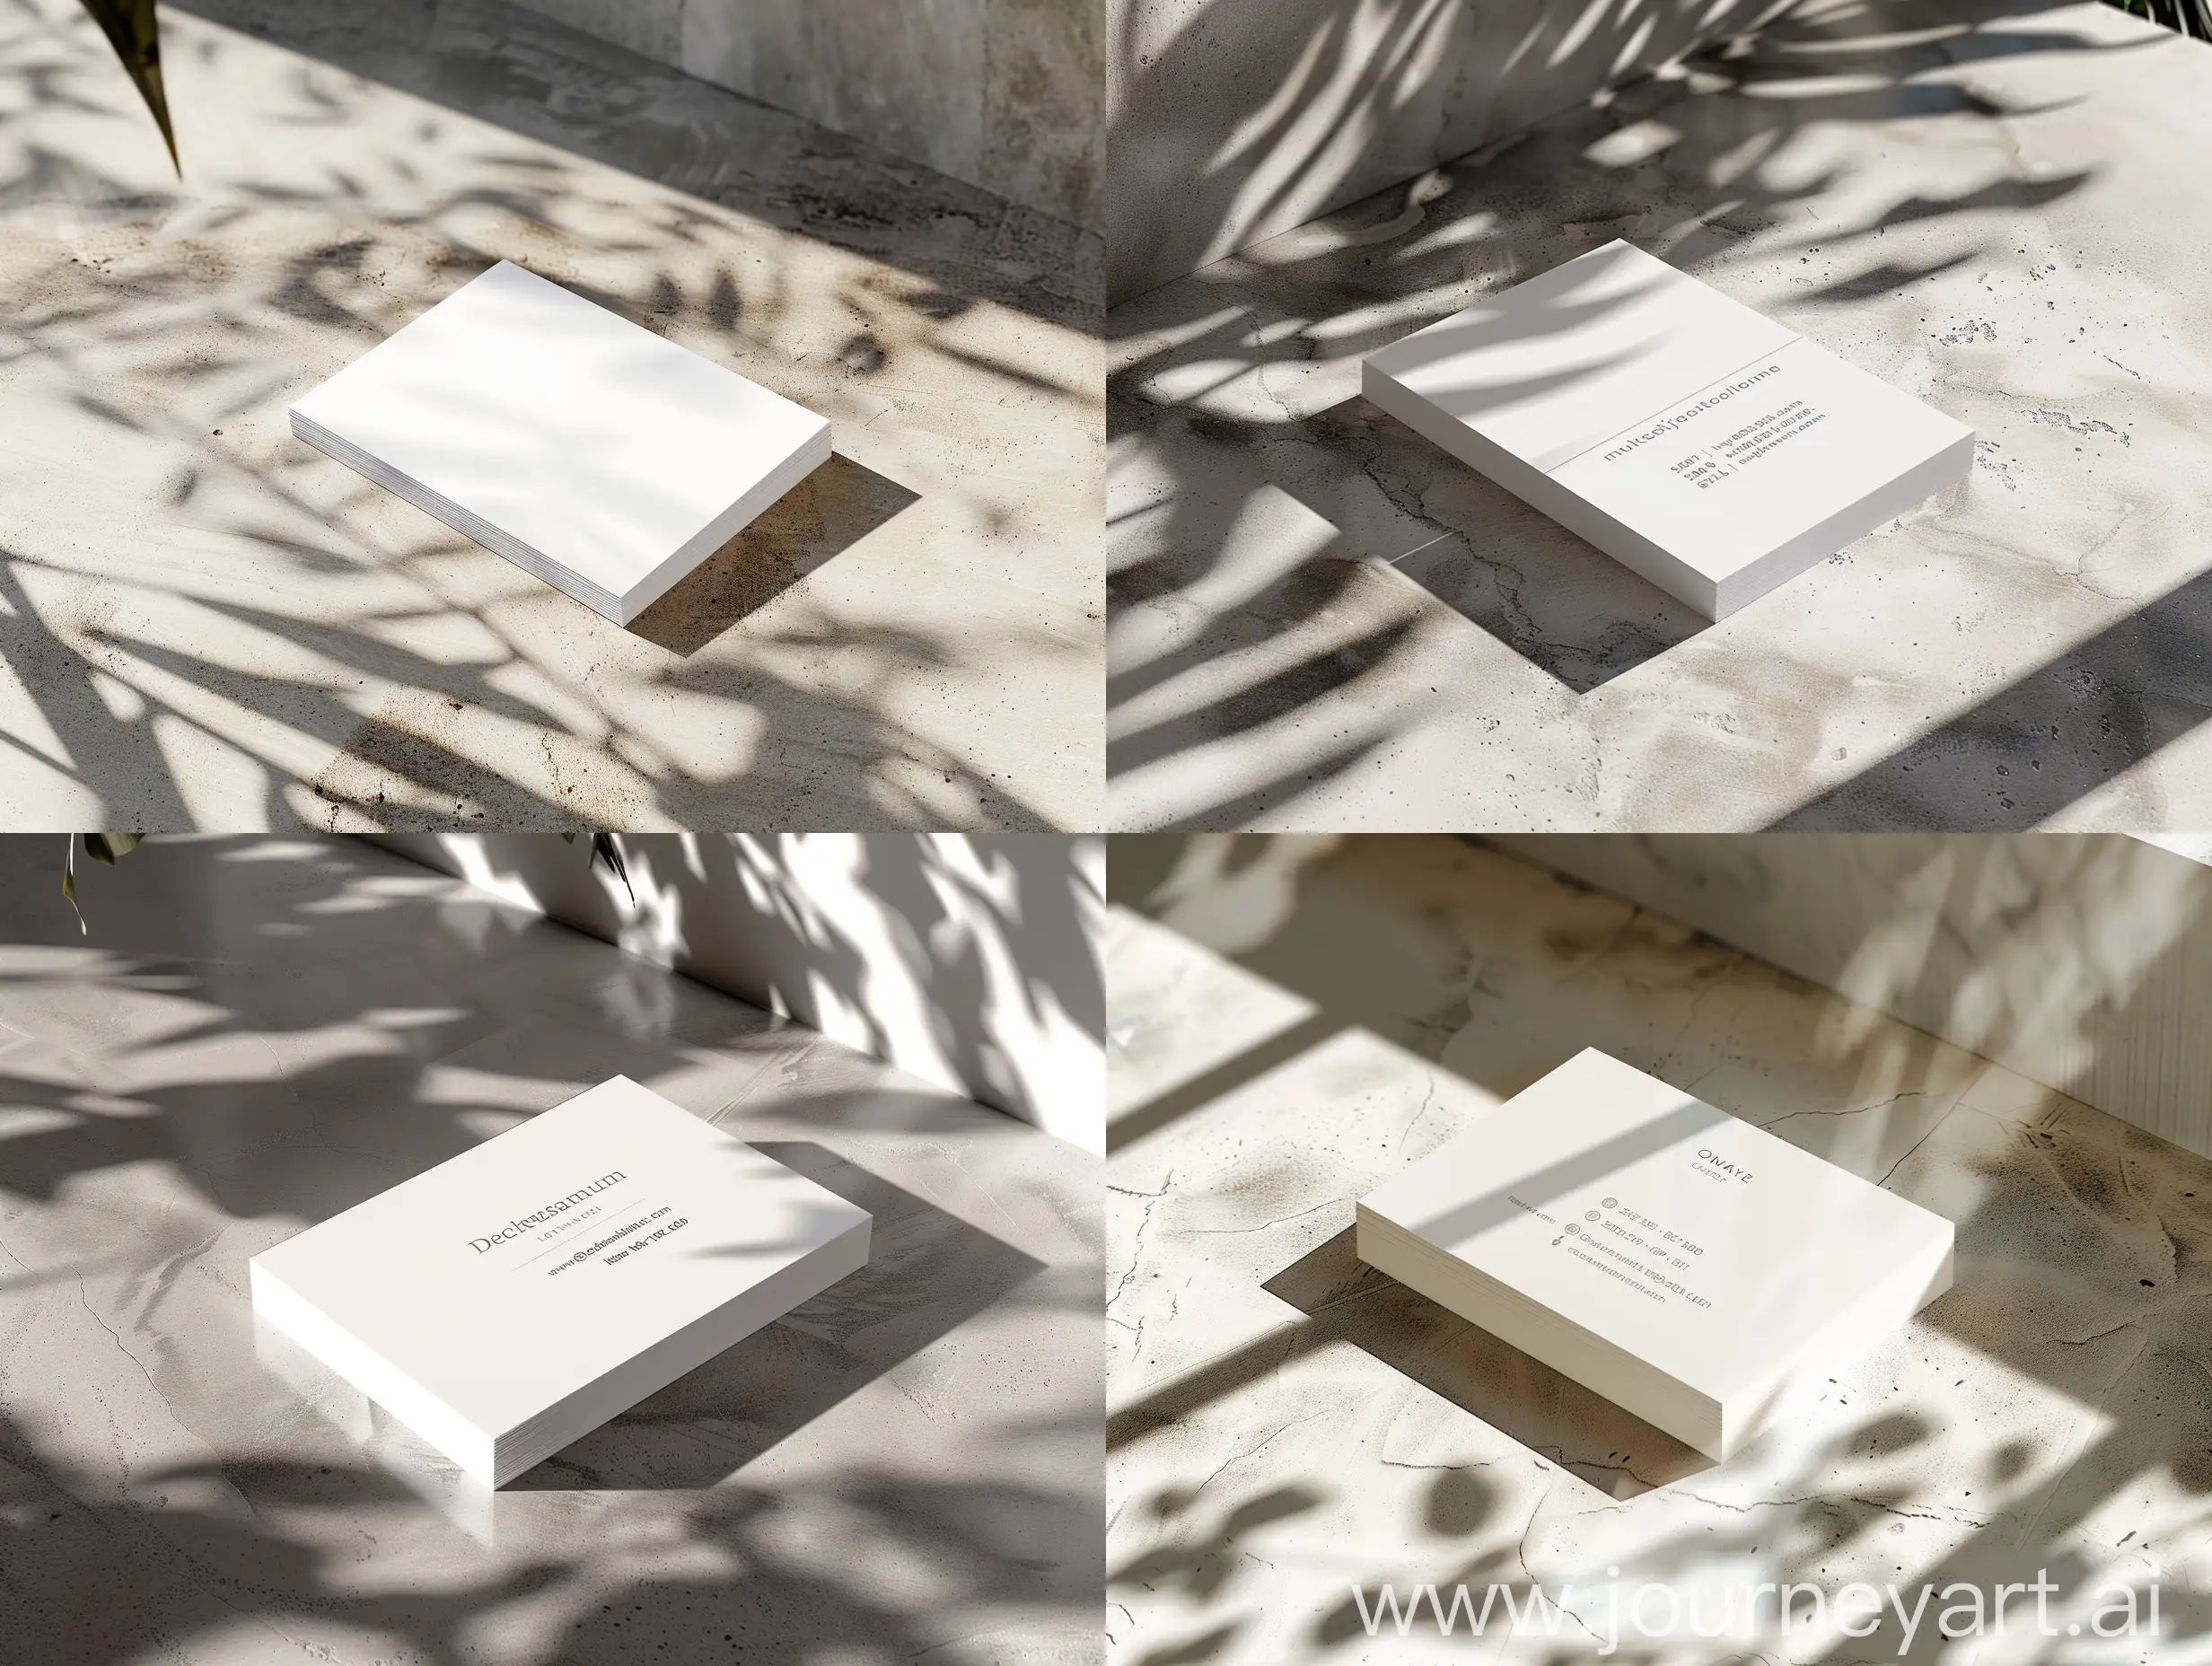 HighQuality-White-Business-Card-Mockup-on-Concrete-Floor-with-Sunlight-and-Shadows